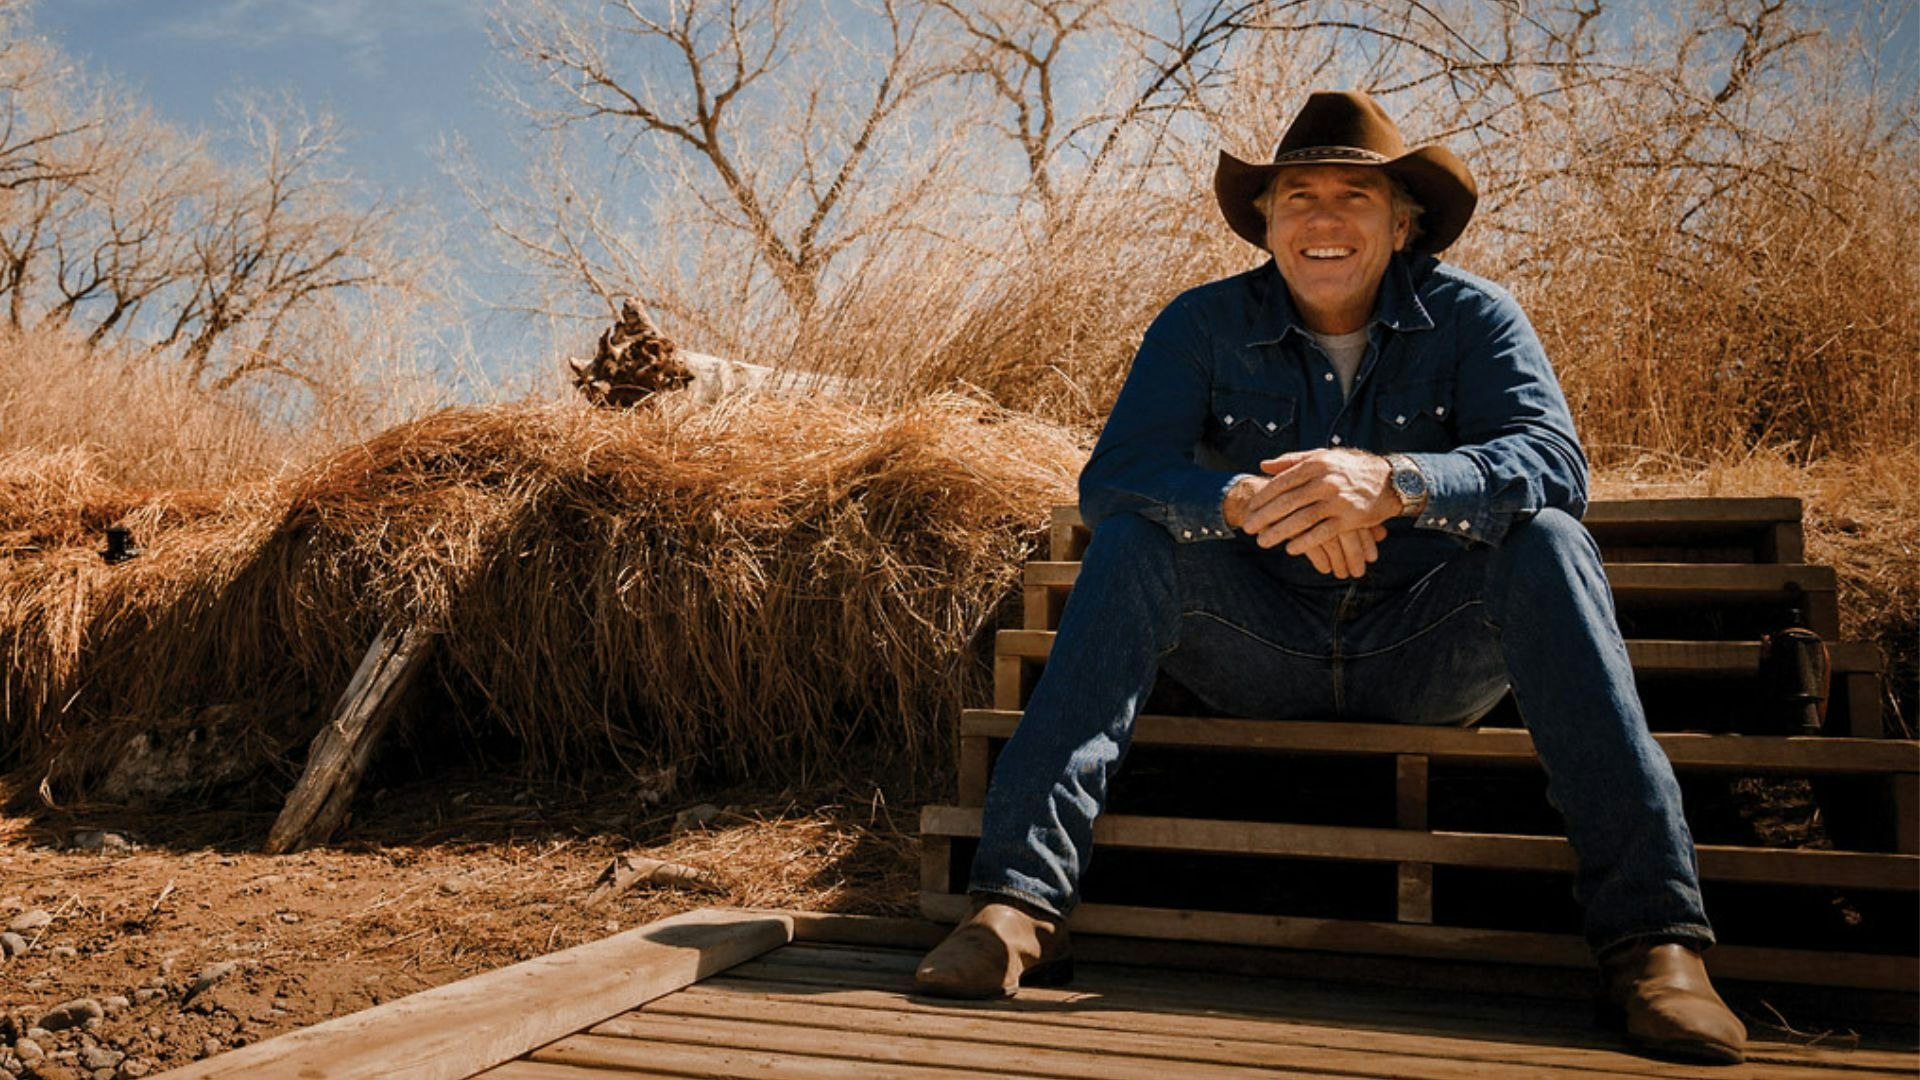 Is Longmire TV Show Coming Back? Find Out the Latest Updates!